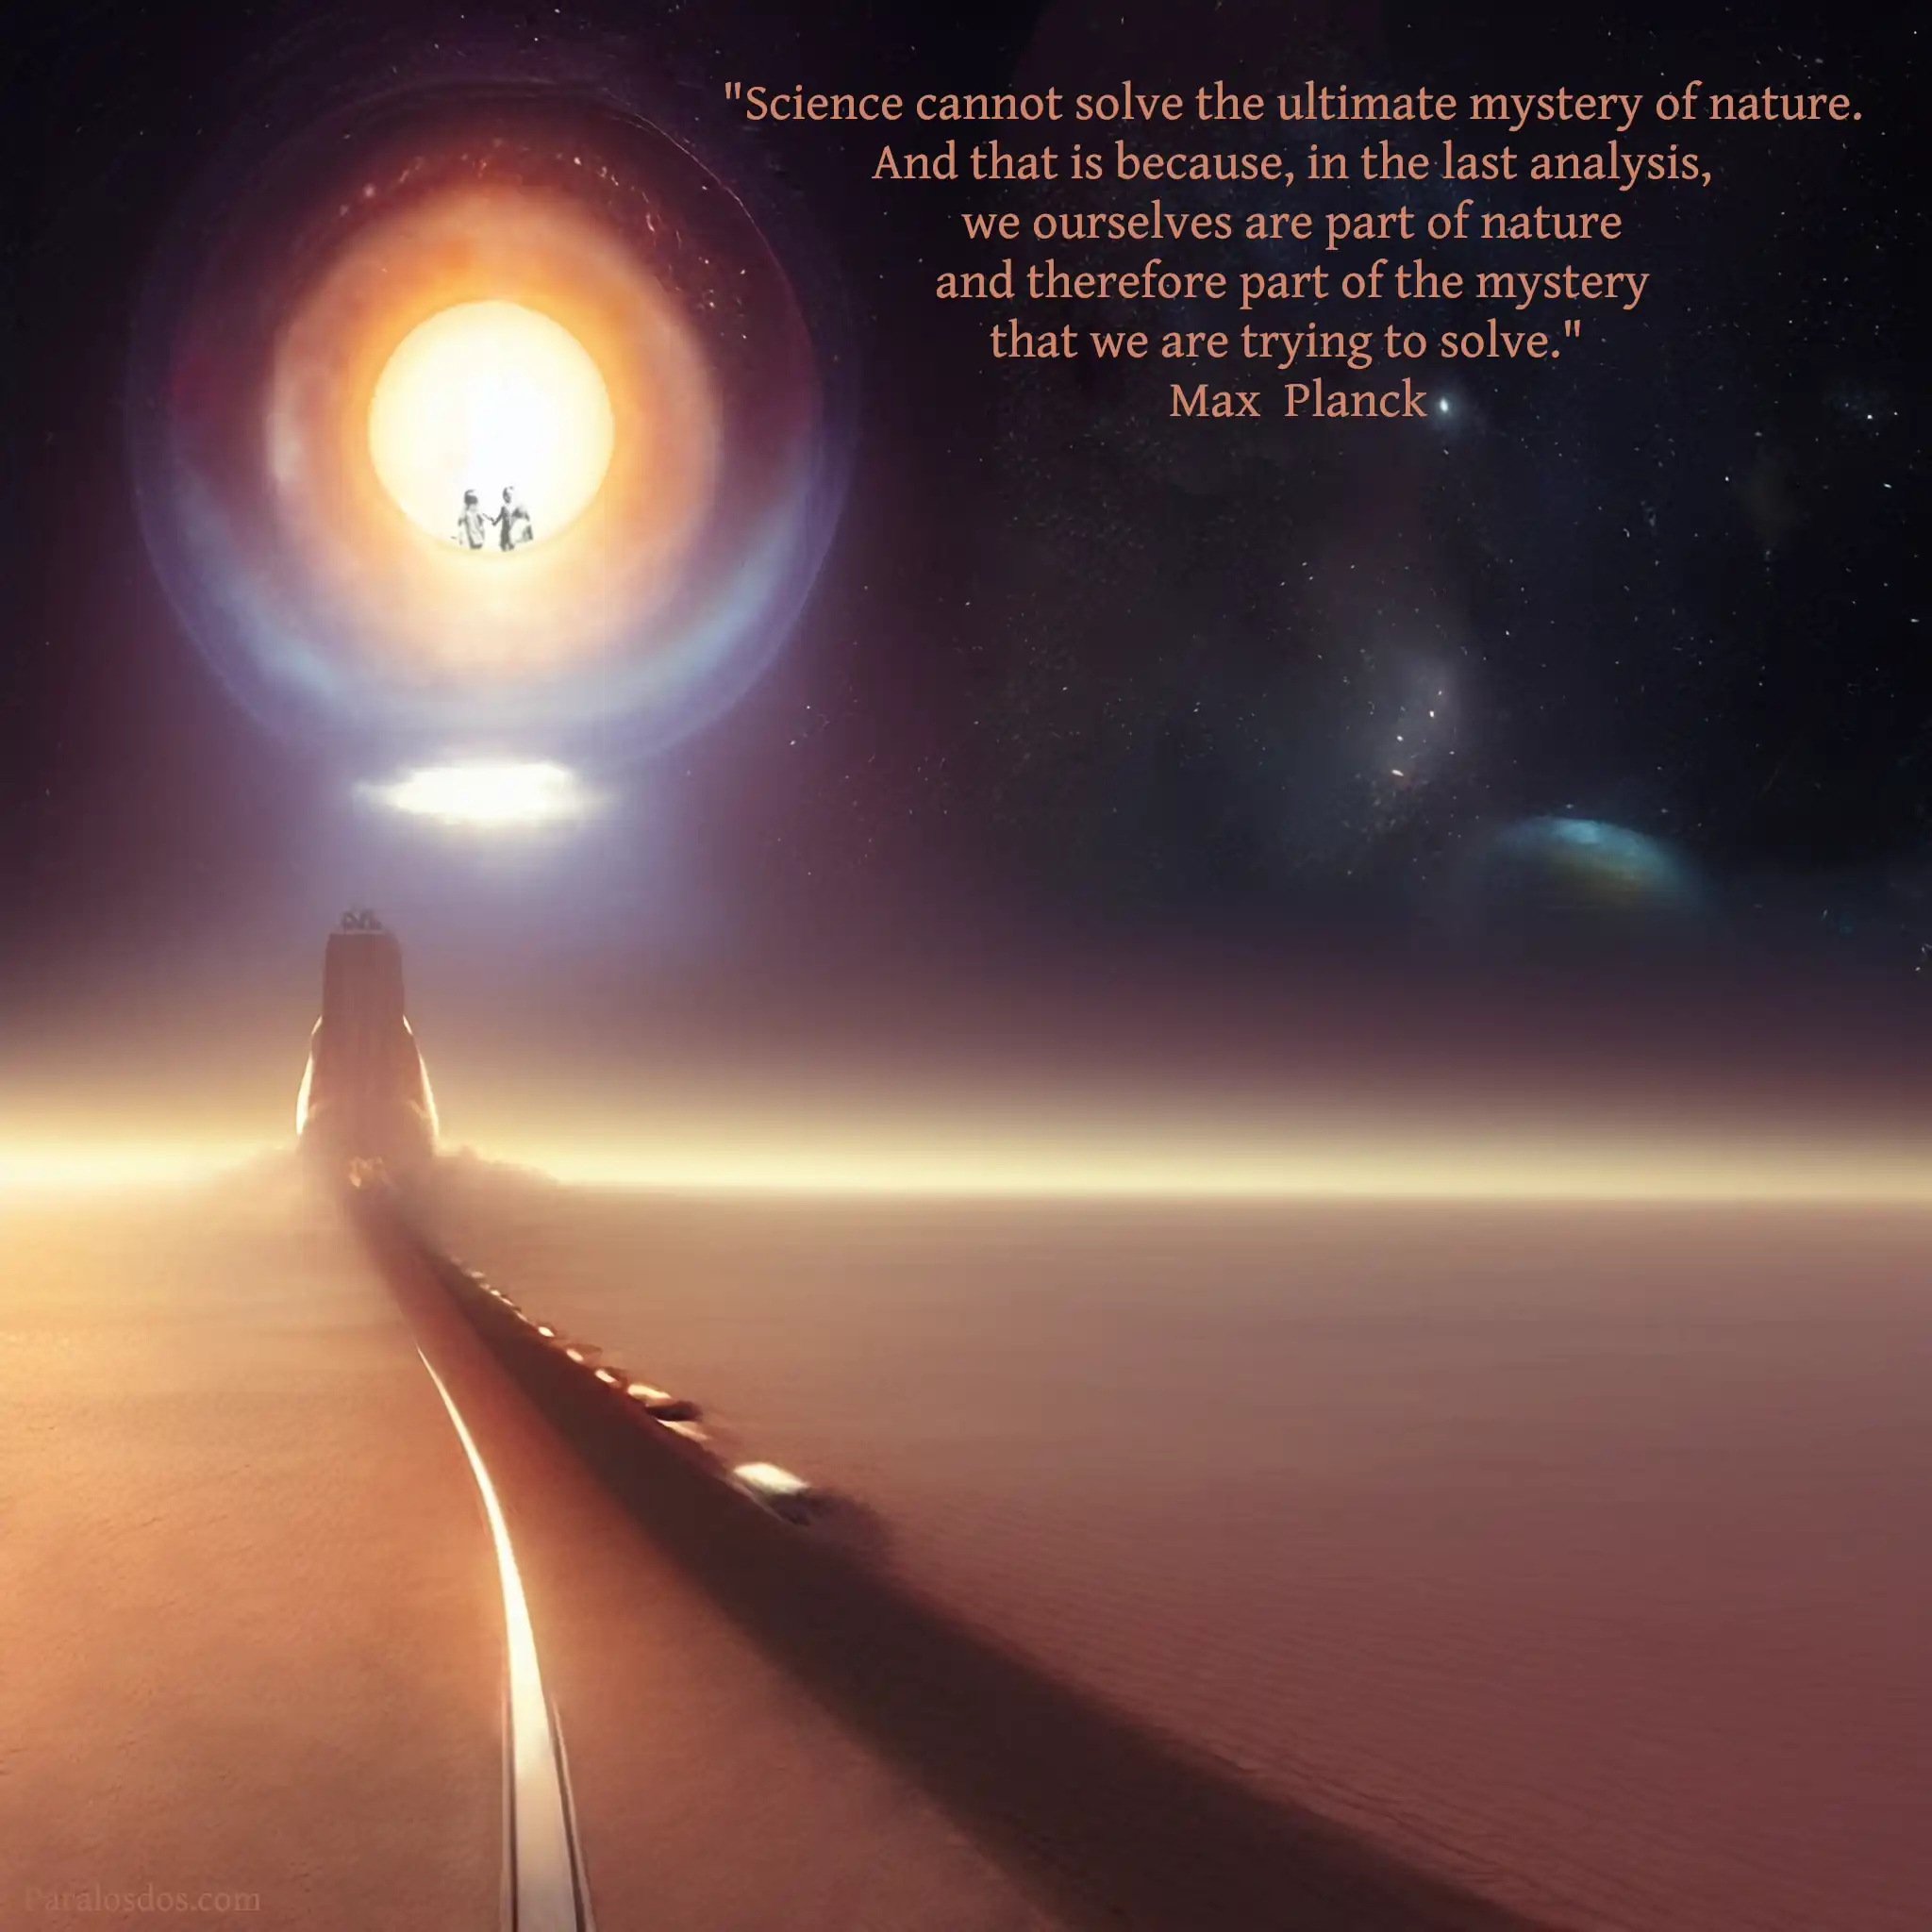 An artistic rendering of a building at the end of a long road to the horizon. There is a huge sphere of light in the sky. The hint of another planet and a galaxy is in the image. The quote reads: "Science cannot solve the ultimate mystery of nature. And that is because, in the last analysis, we ourselves are part of nature and therefore part of the mystery that we are trying to solve." Max Planck